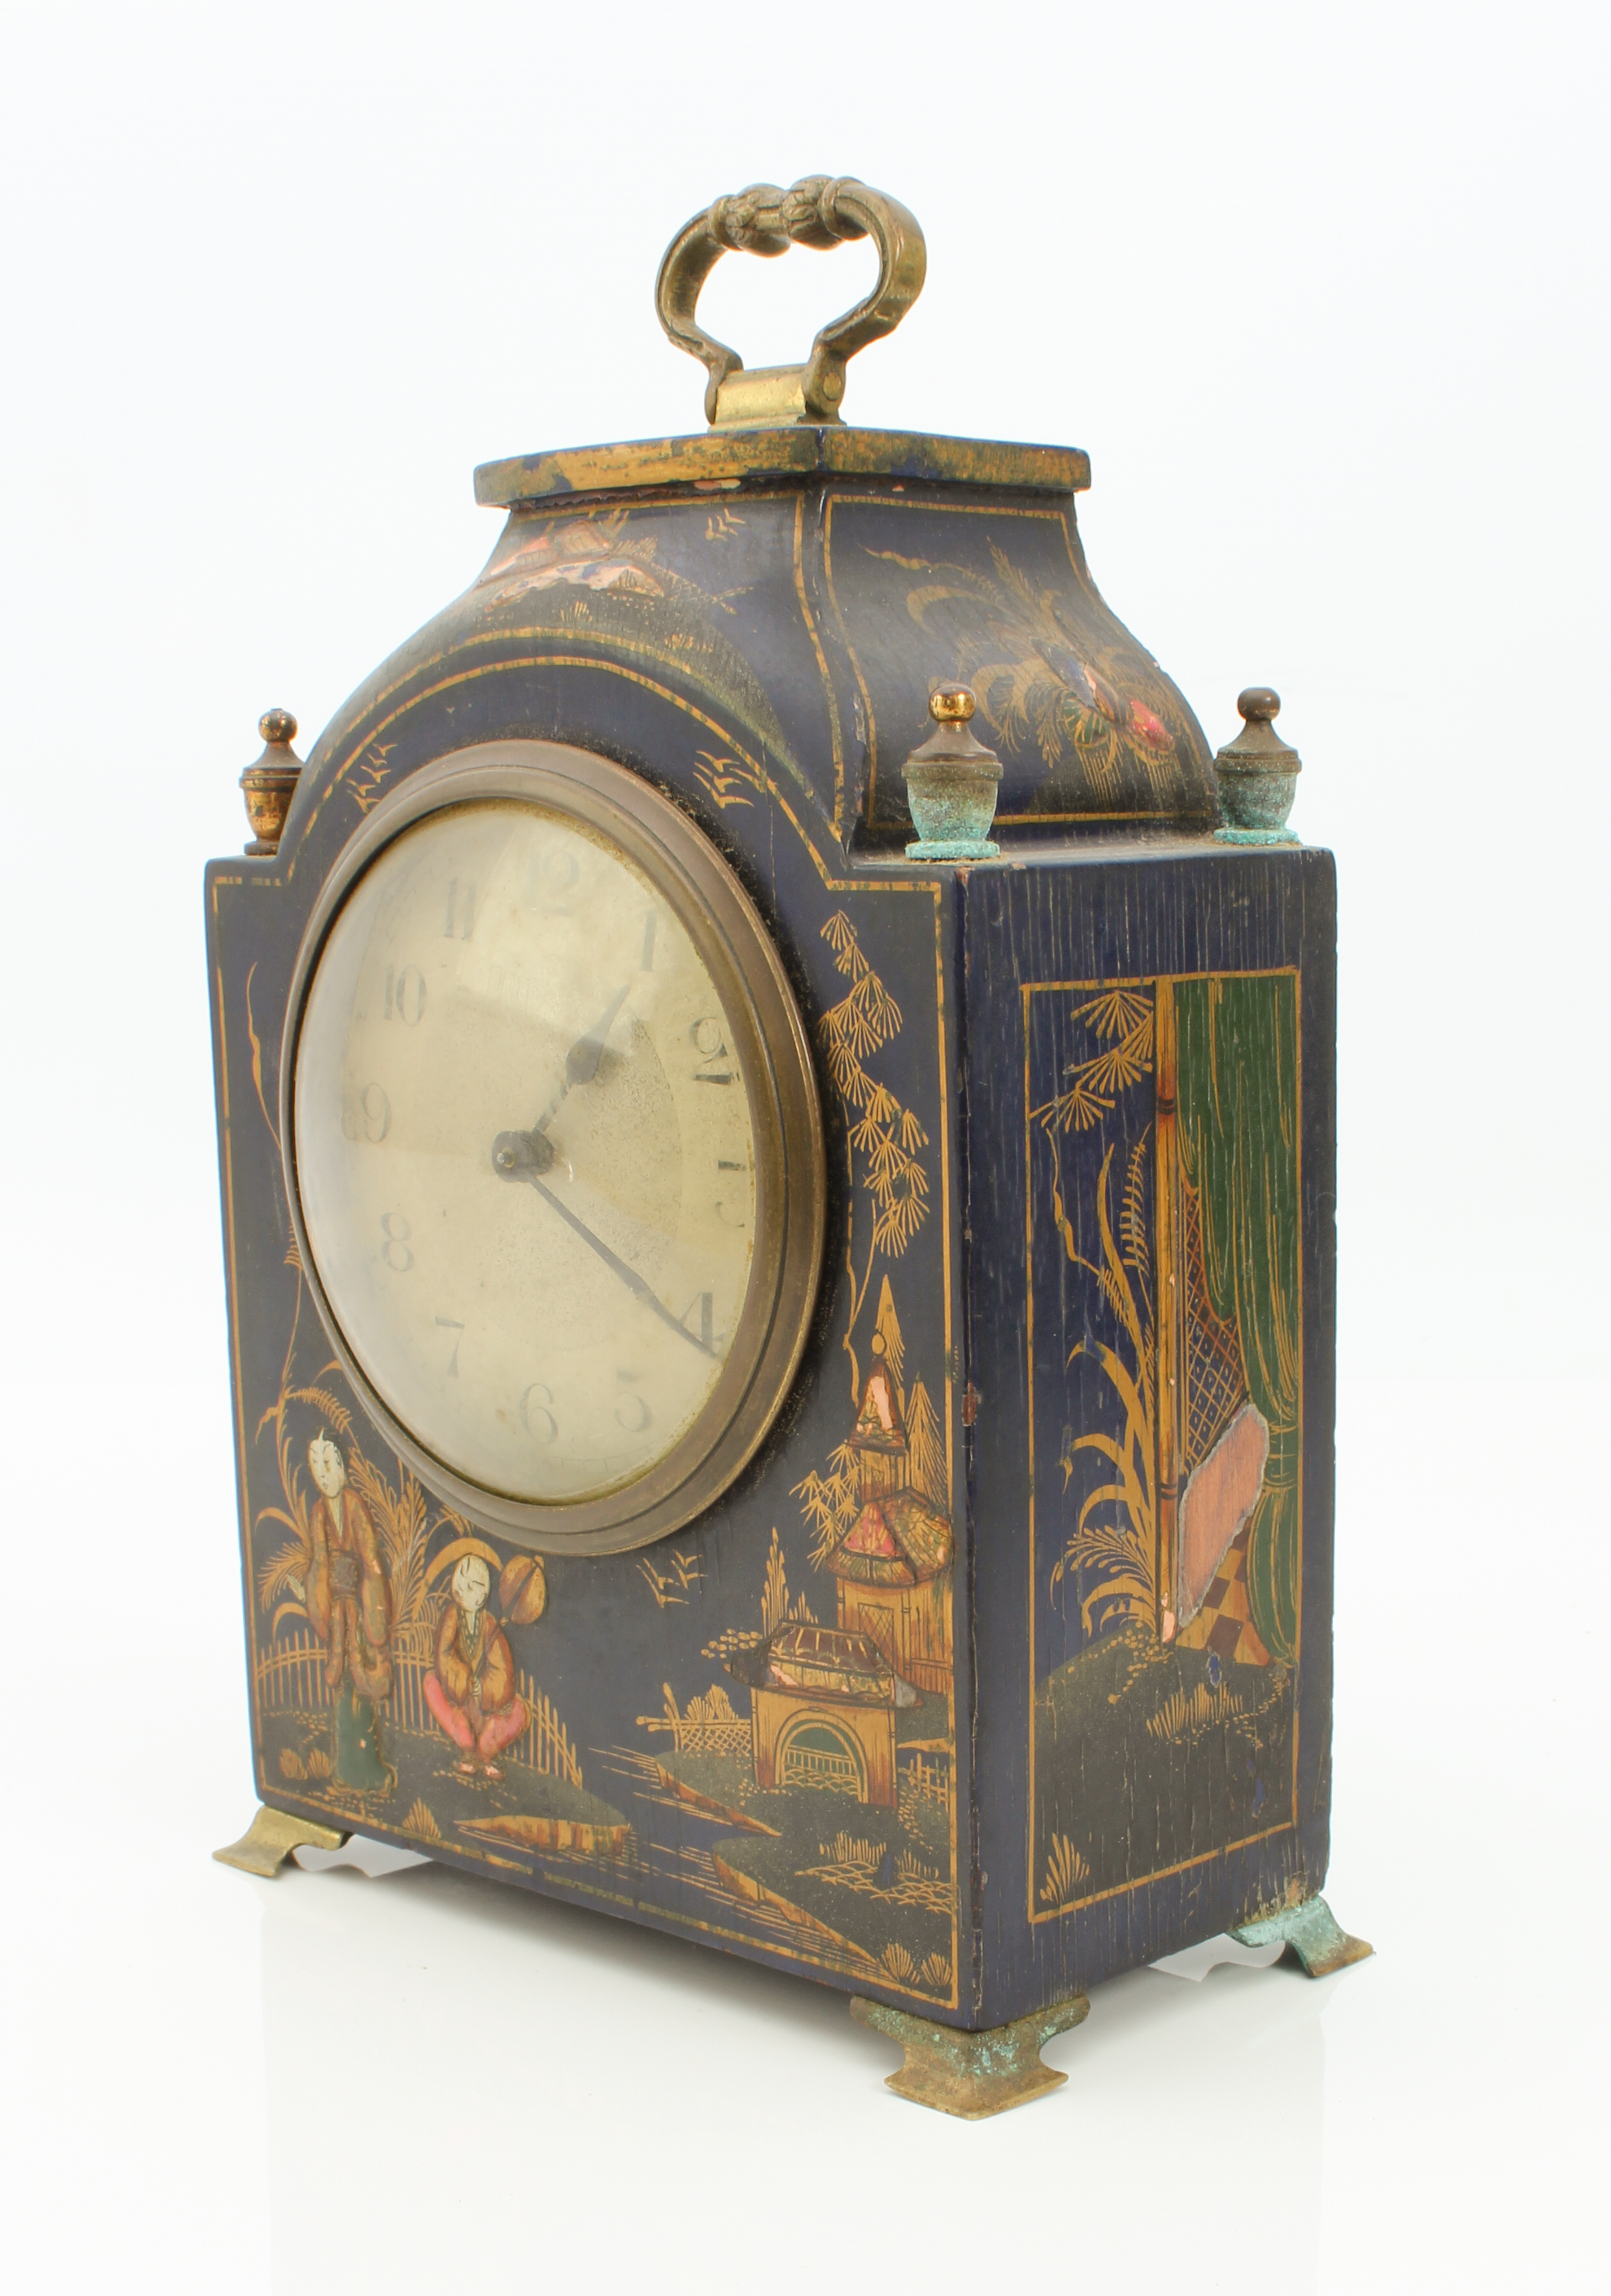 A brass-mounted desk or mantel clock in the Chinoiserie style - late-19th century, silvered 3¼ in - Image 7 of 10